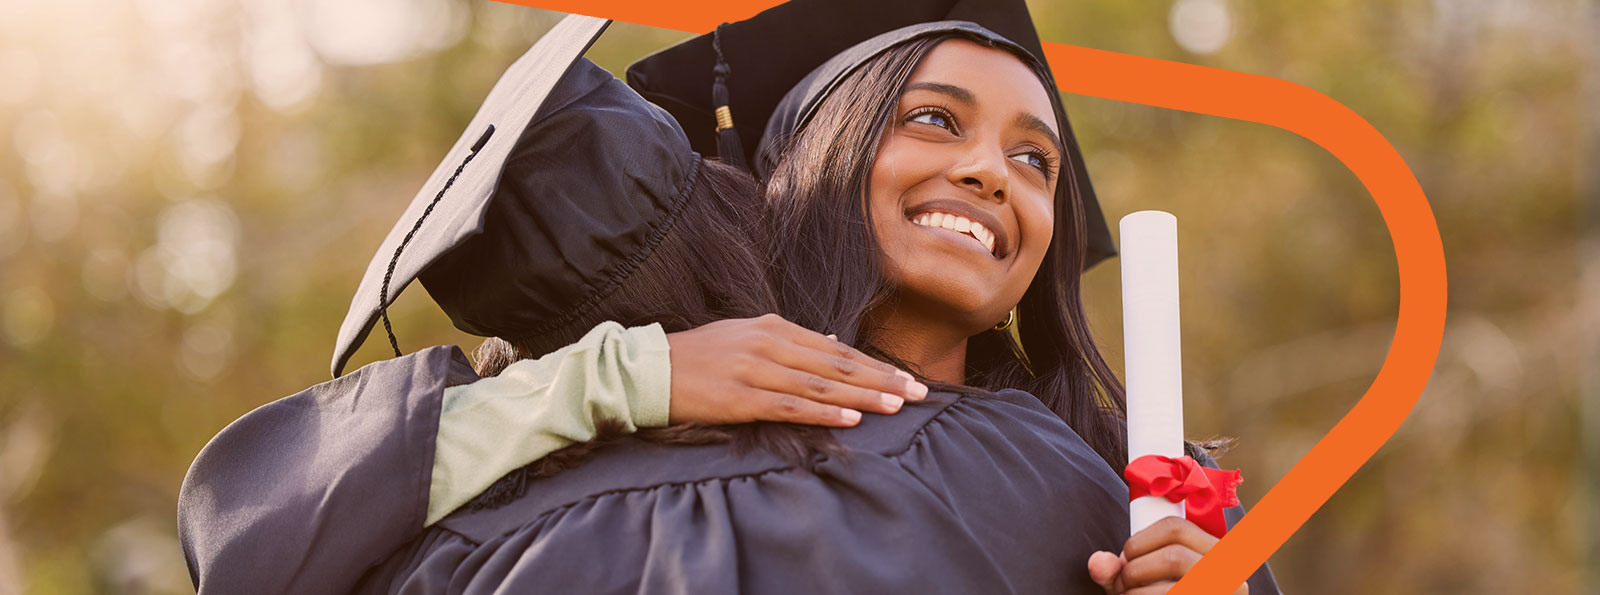 Graduating female college student wearing a cap and gown, holding a rolled-up paper, and hugging a person.